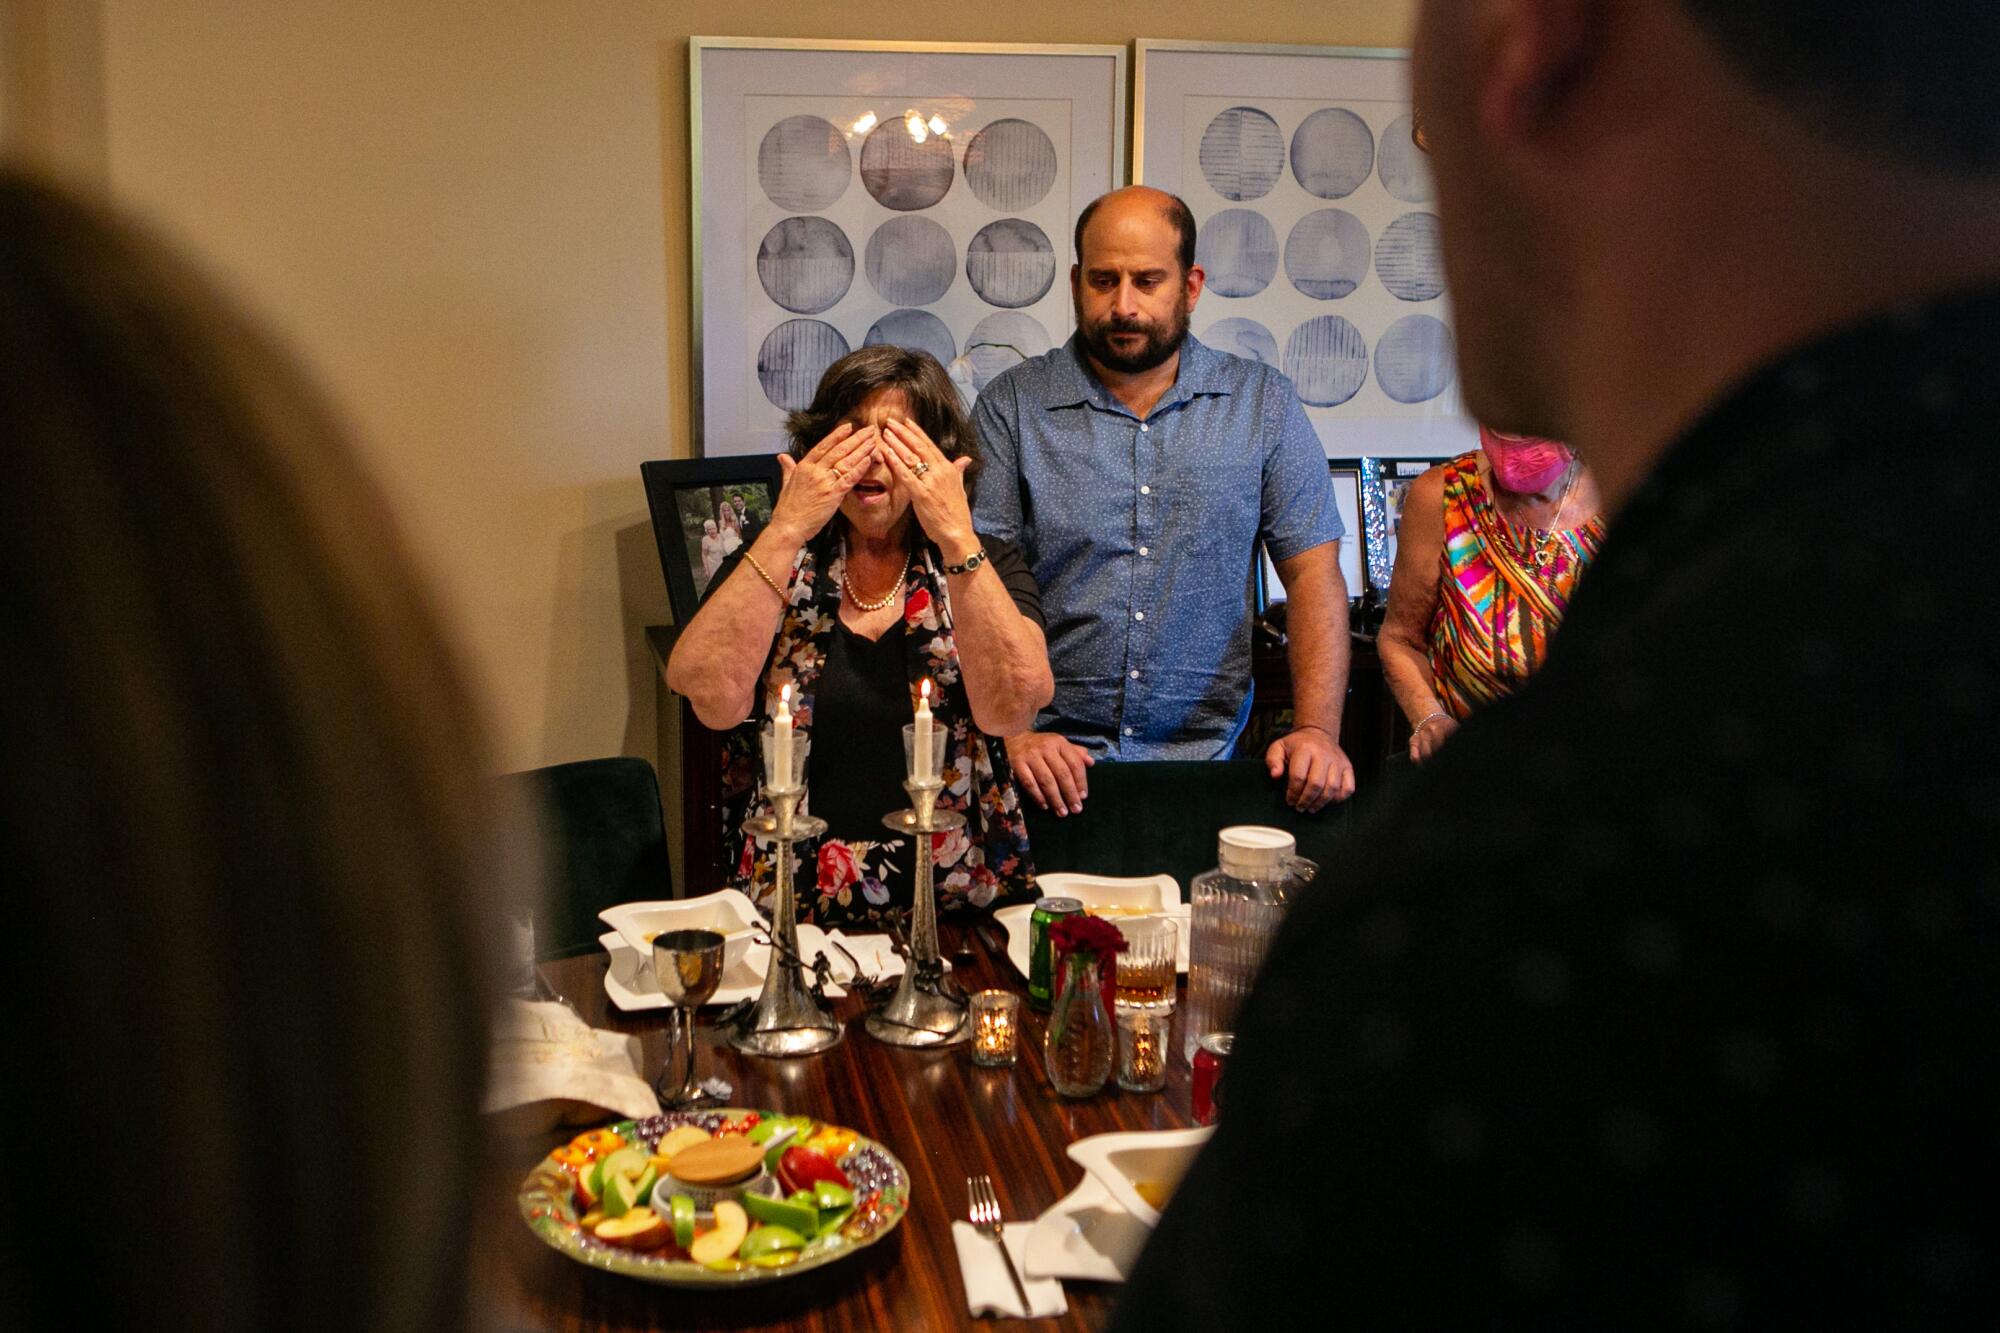 Pamela Taylor, an evacuee of the Caldor fire in South Lake Tahoe, recites a blessing in Hebrew at Rosh Hashanah dinner.